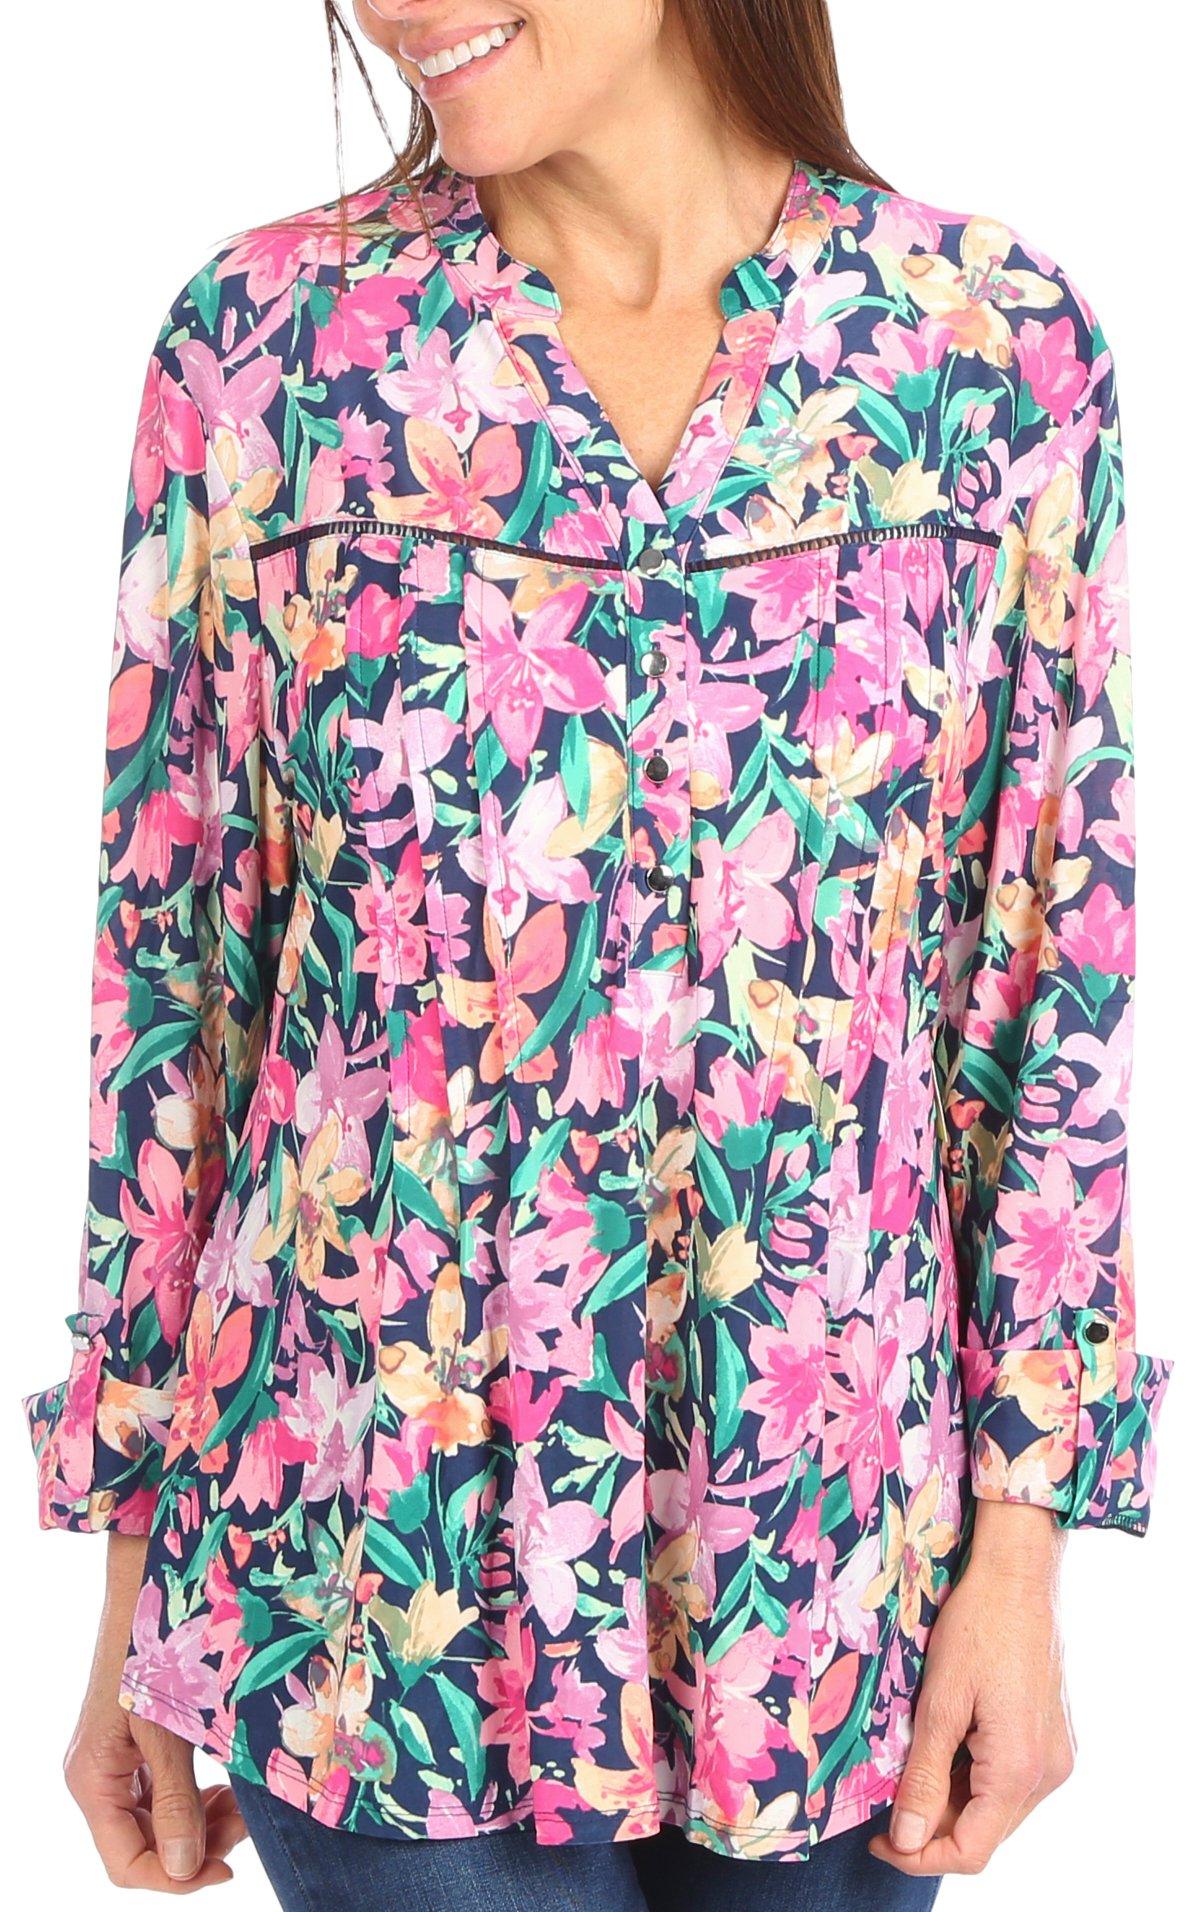 Juniper + Lime Womens Floral Pleated 3/4 Sleeve Top